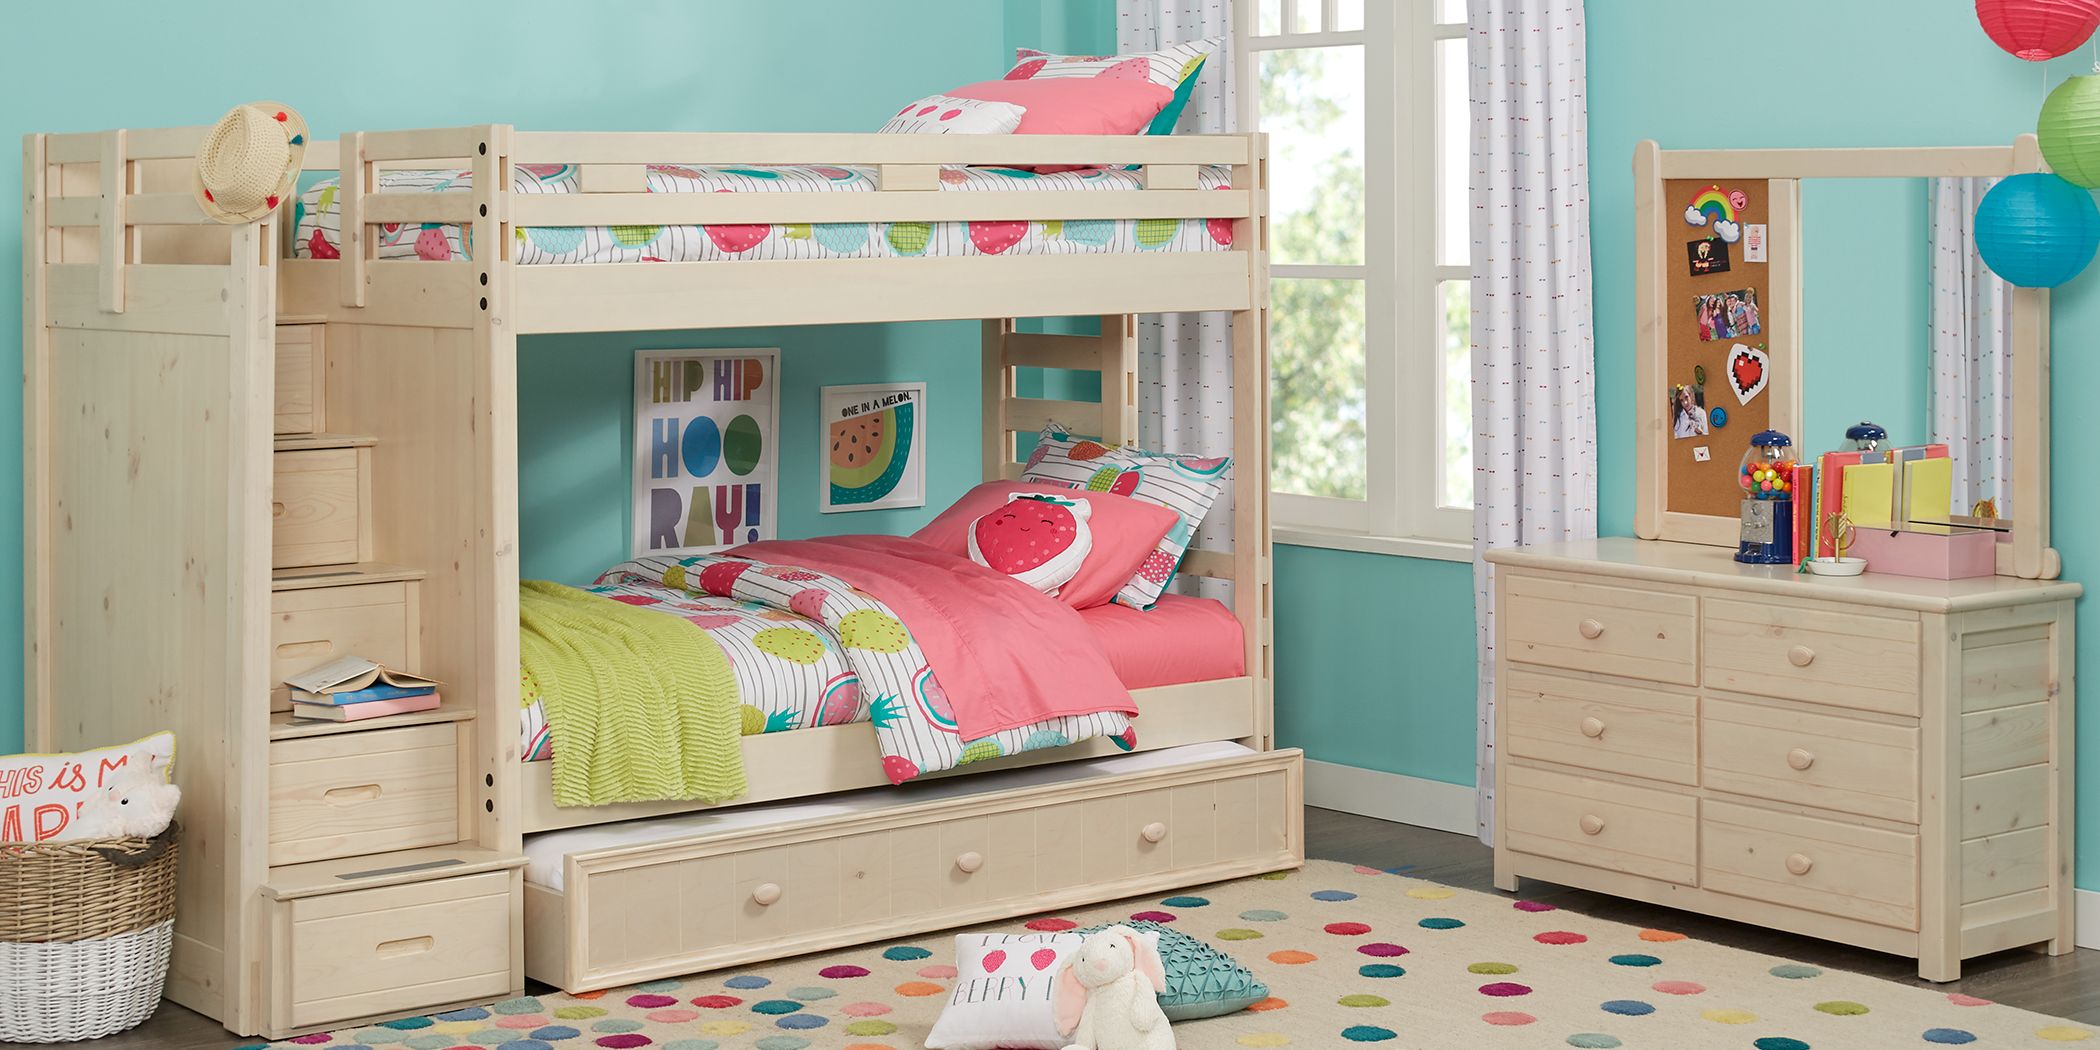 Twin Step Bunk Bed, Creekside Stone Wash Twin Full Bunk Bed